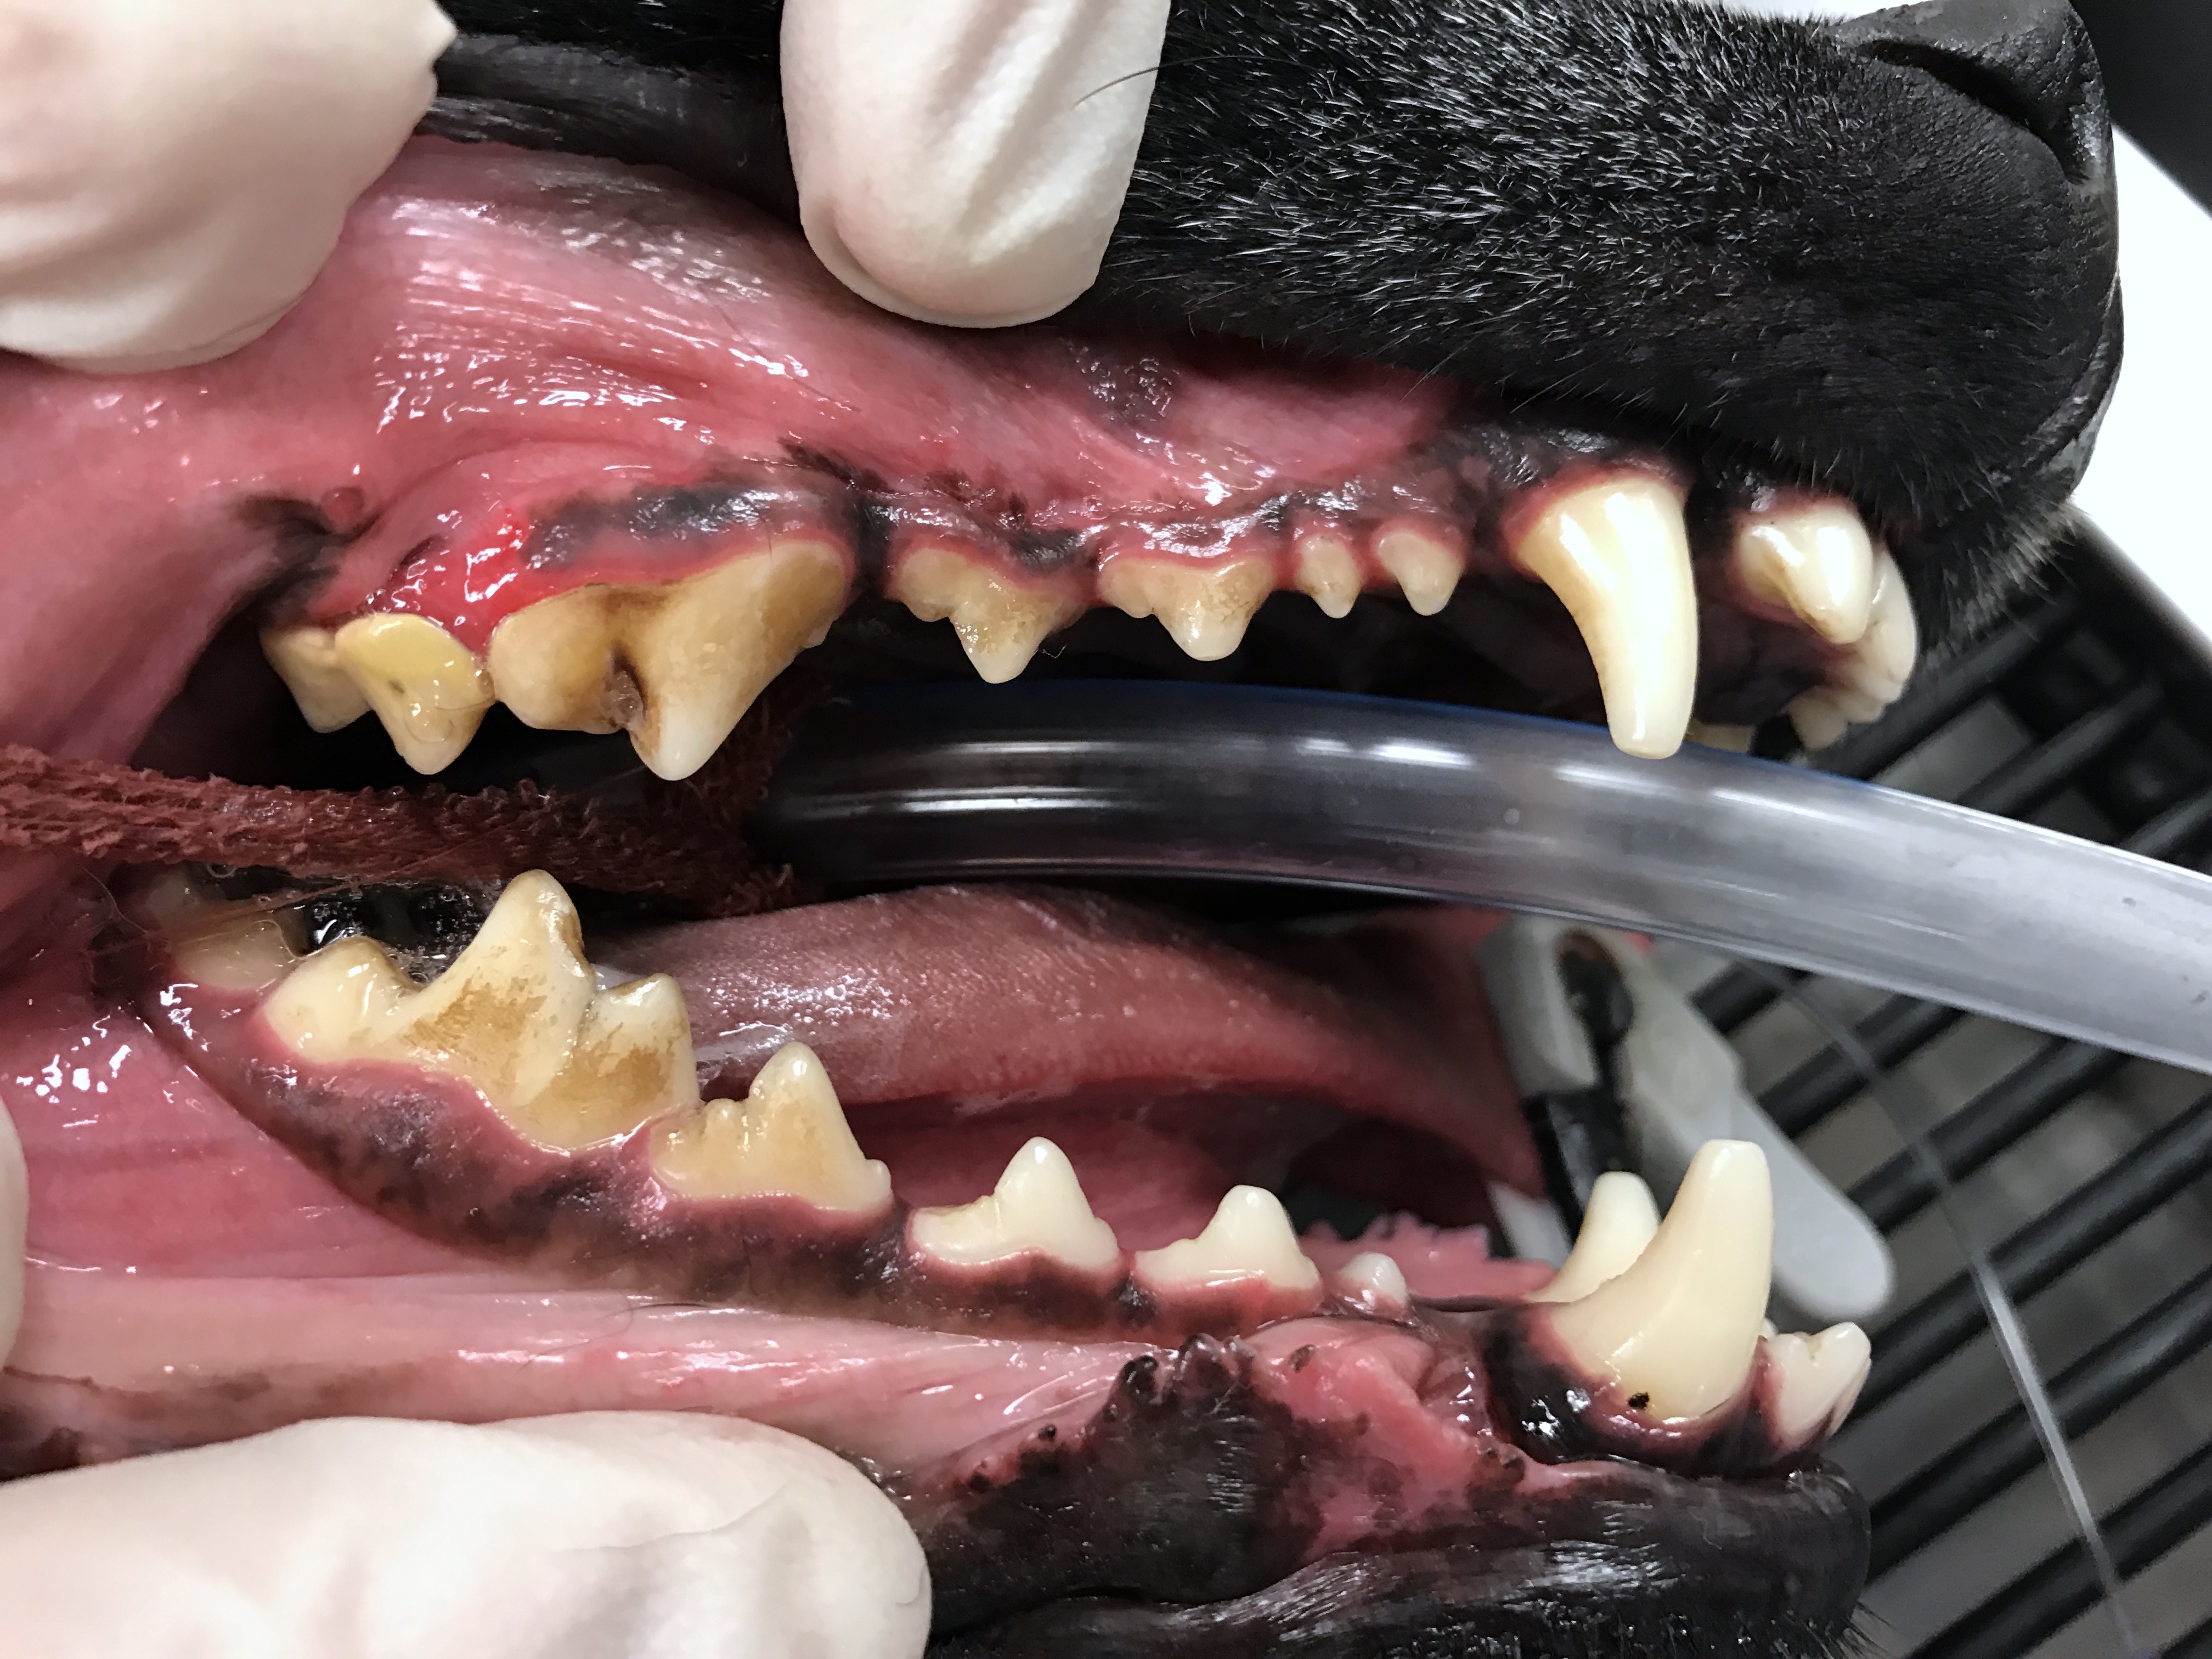 Dog Teeth Cleaning Without Anesthesia San Diego TeethWalls